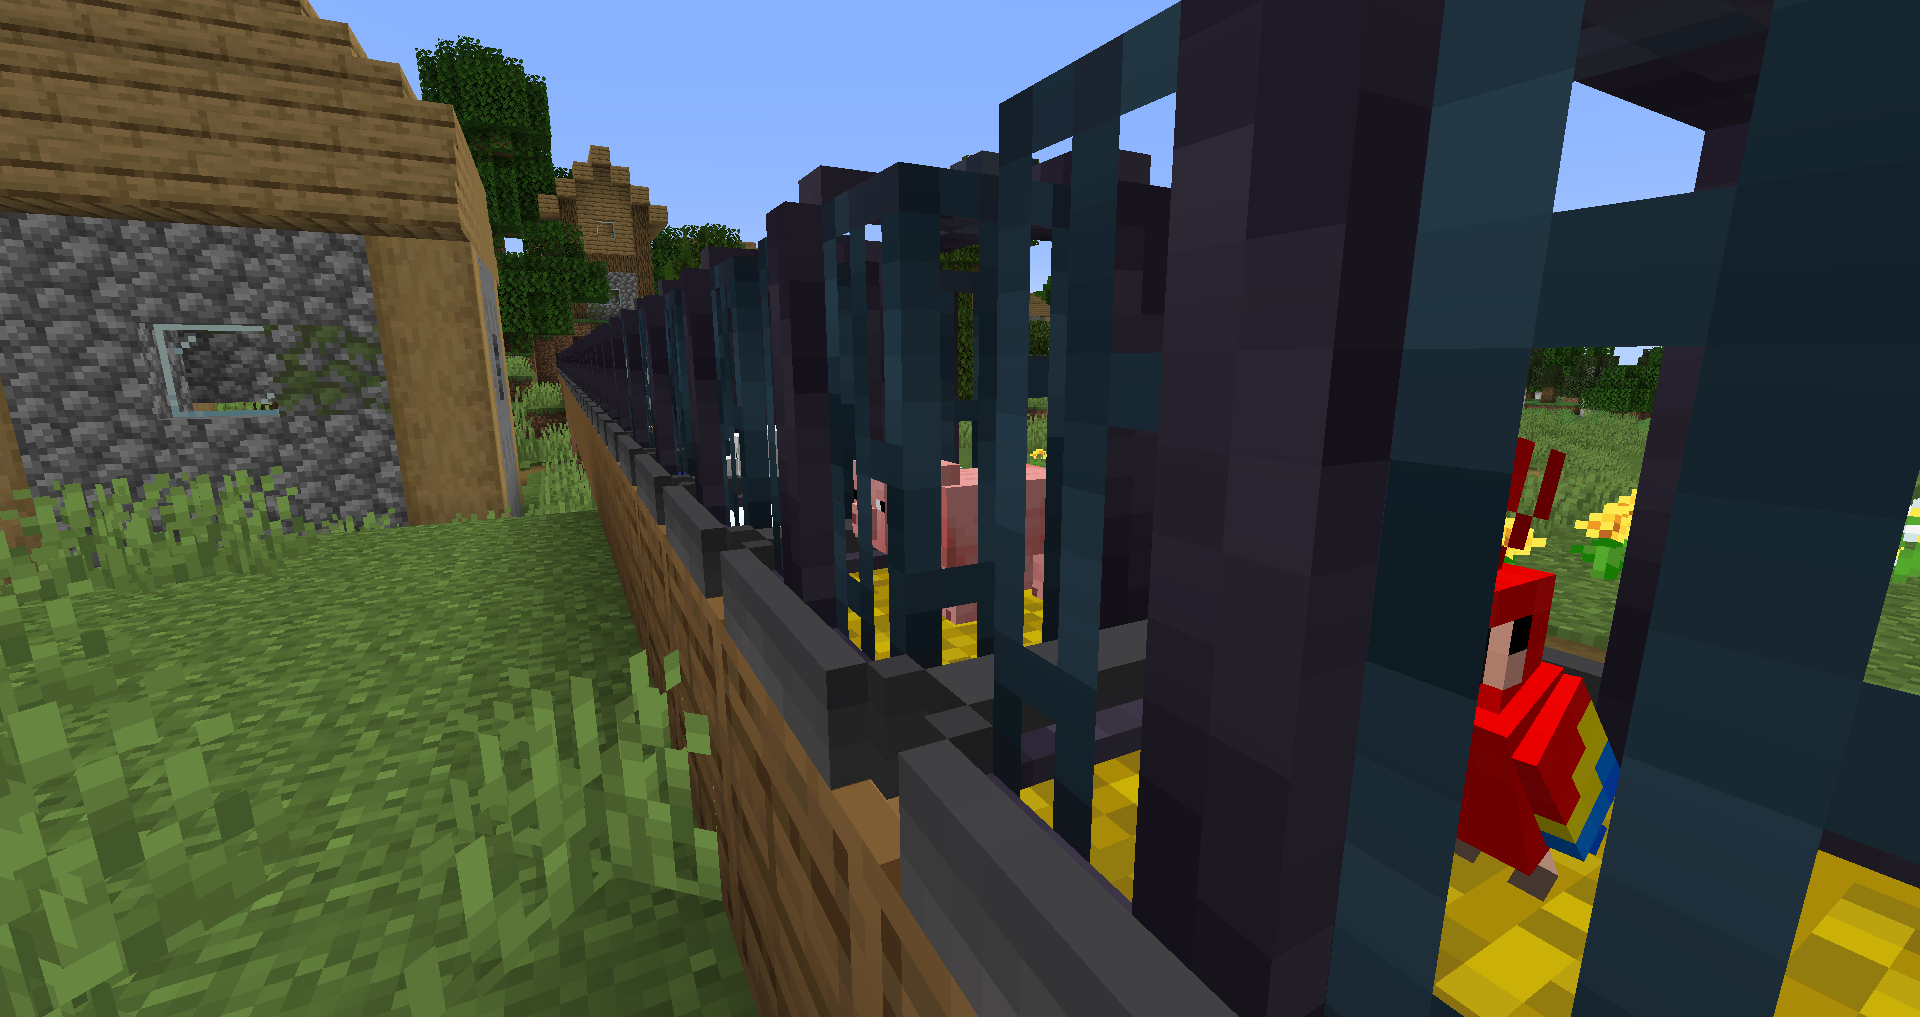 Mob Cages with entities